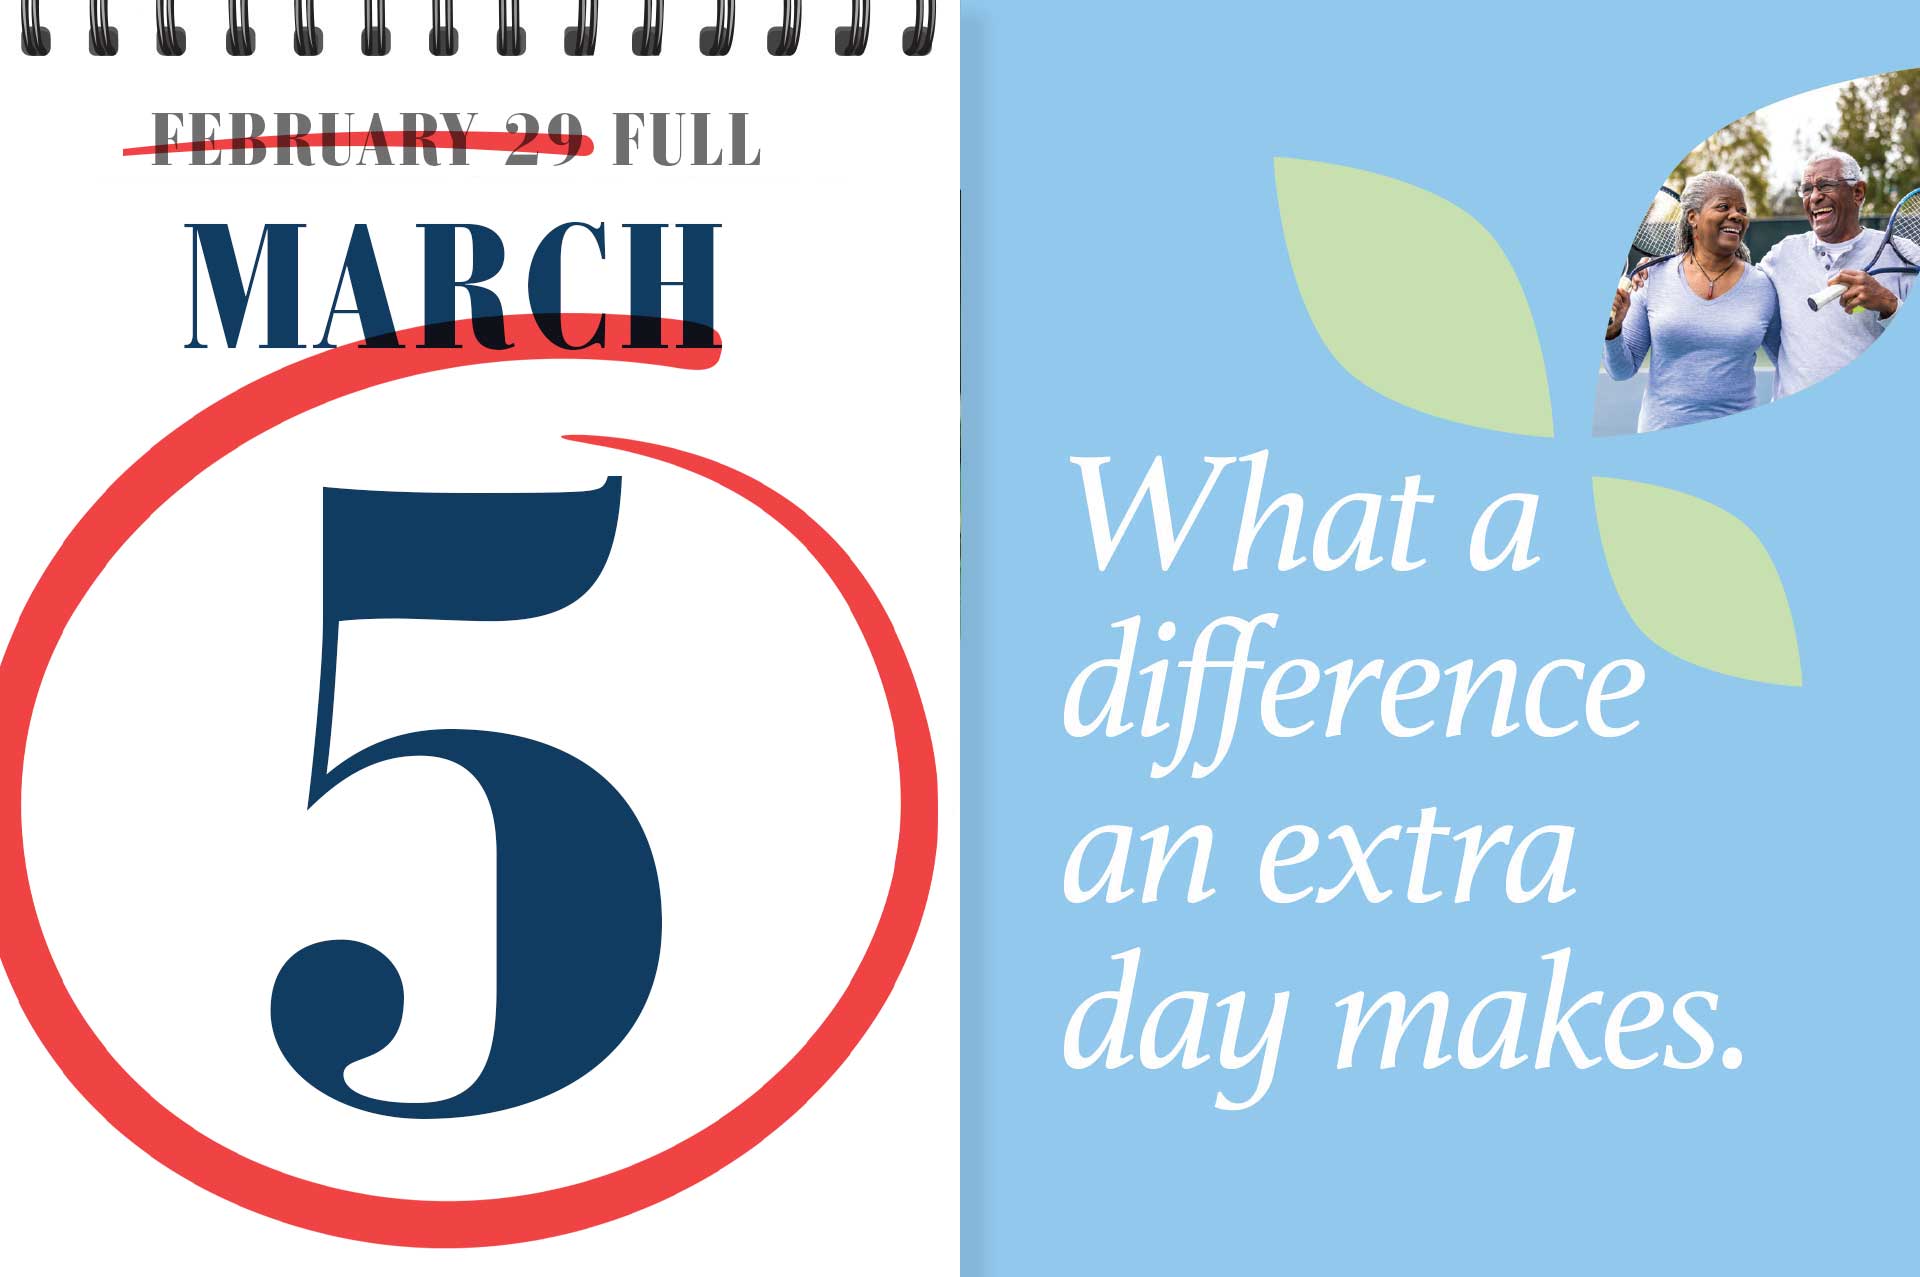 New Date: March 5 - What a difference an extra day makes